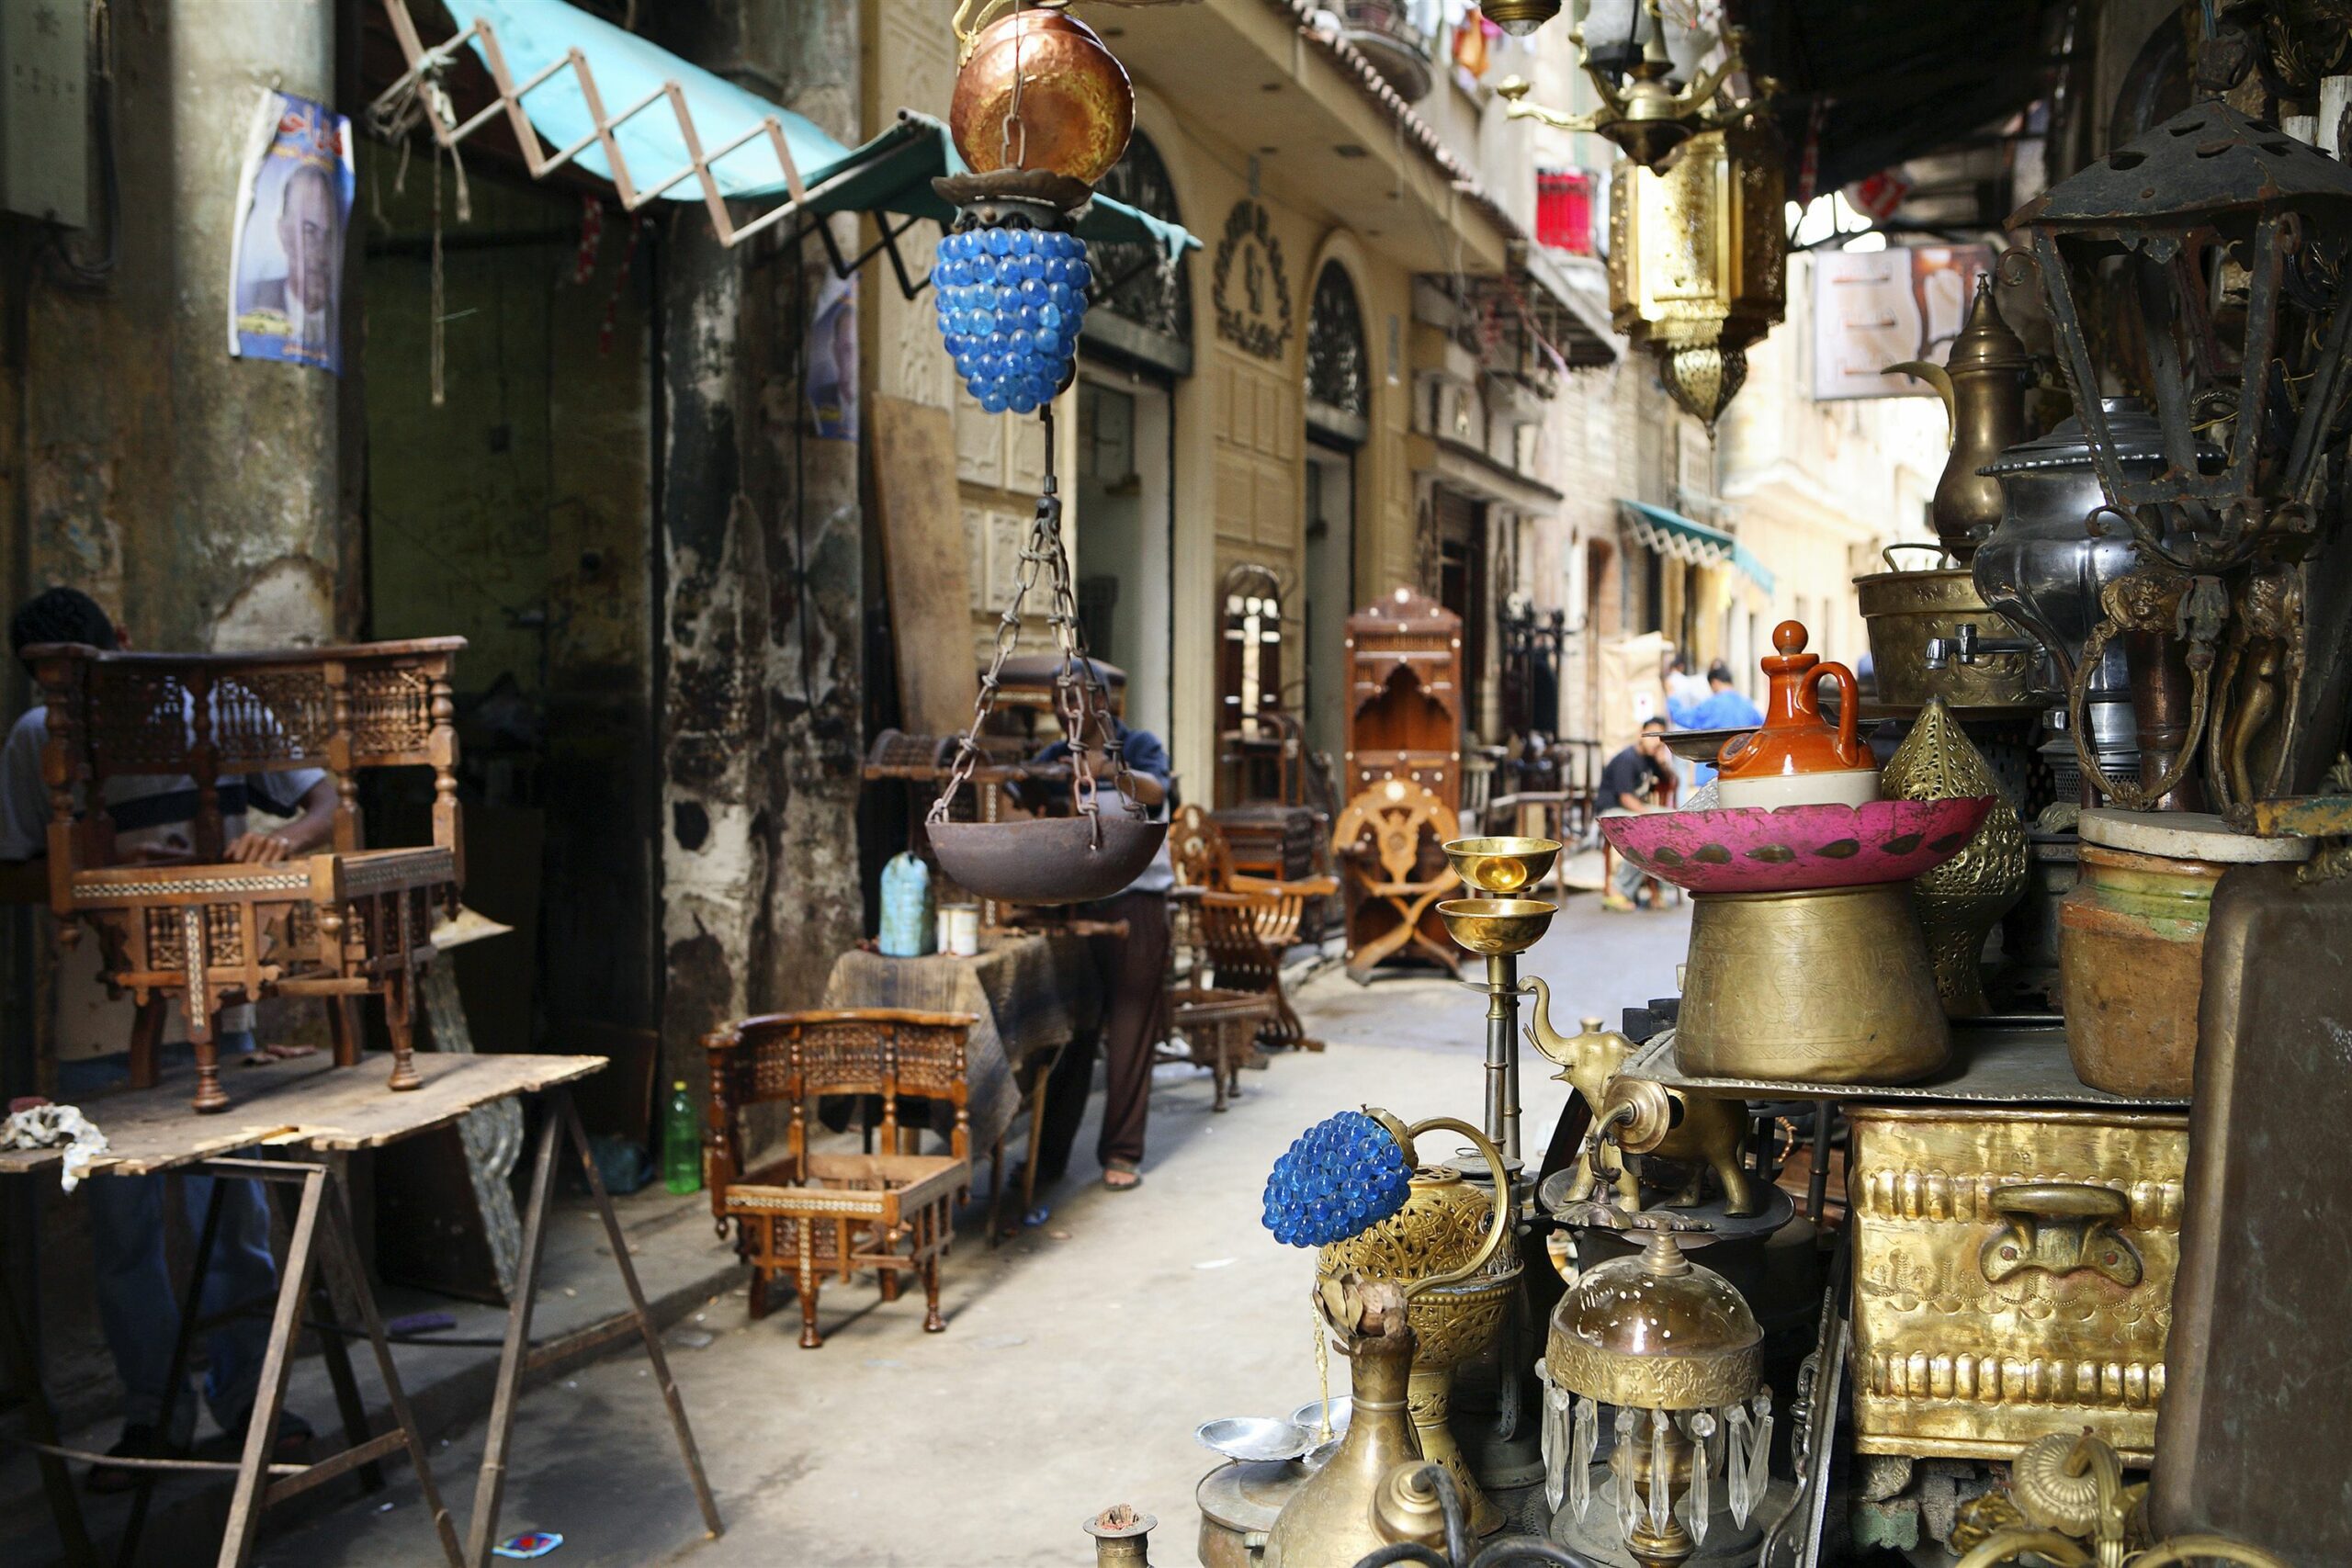 Souk with wares to sell in Cairo